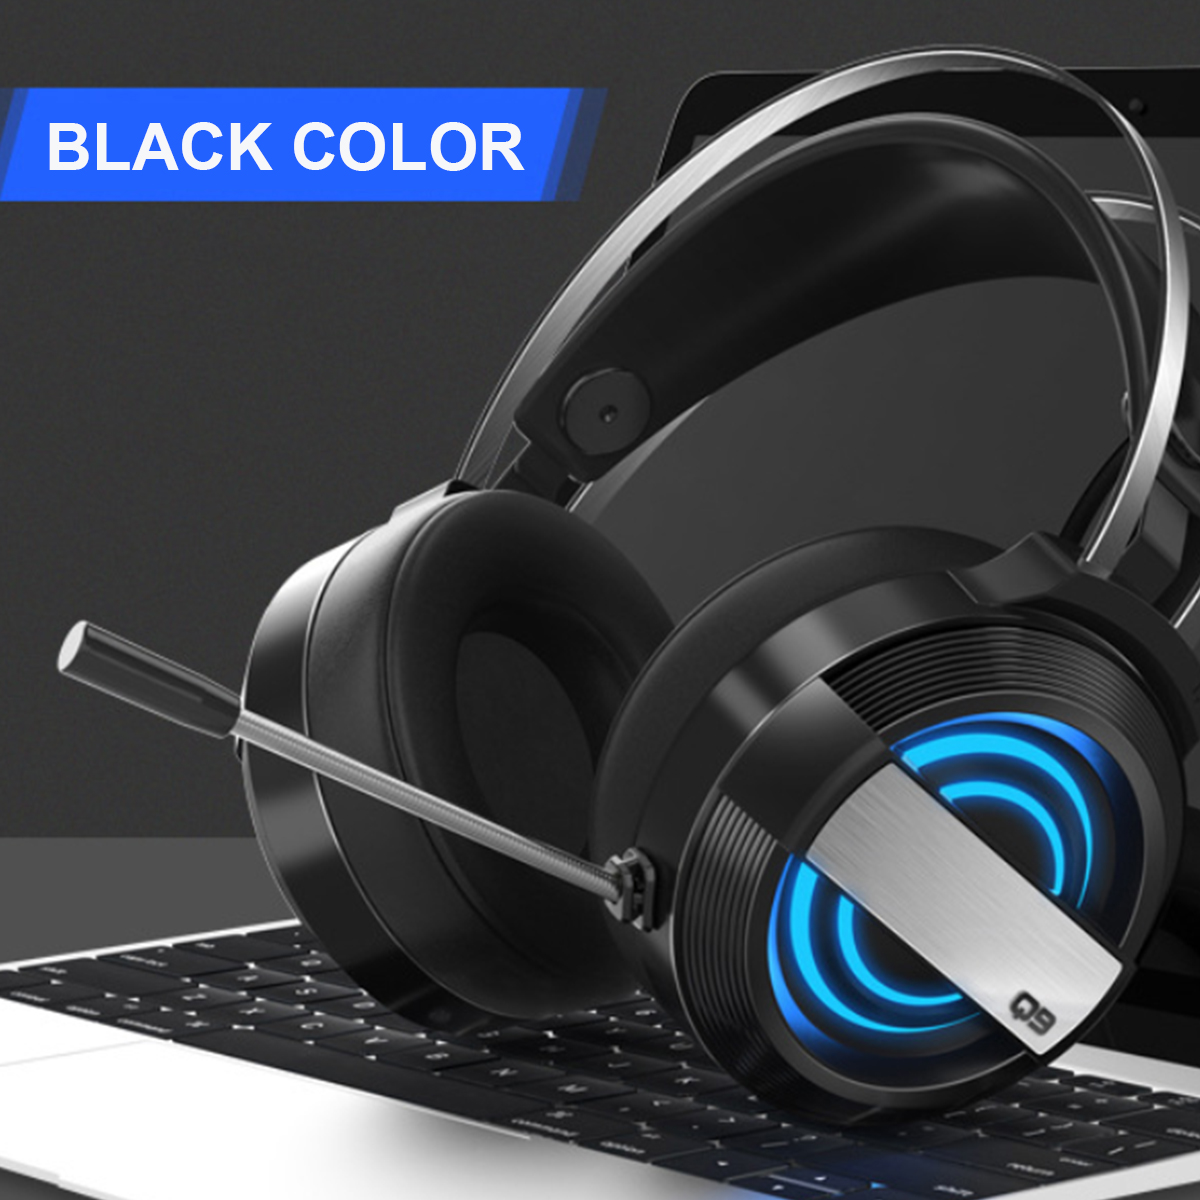 Bakeey-Gaming-Headphone-USB-Port-50mm-Driver-Headset-Foldable-Over-Ear-Gaming-Headset-Noise-Cancelli-1747835-13